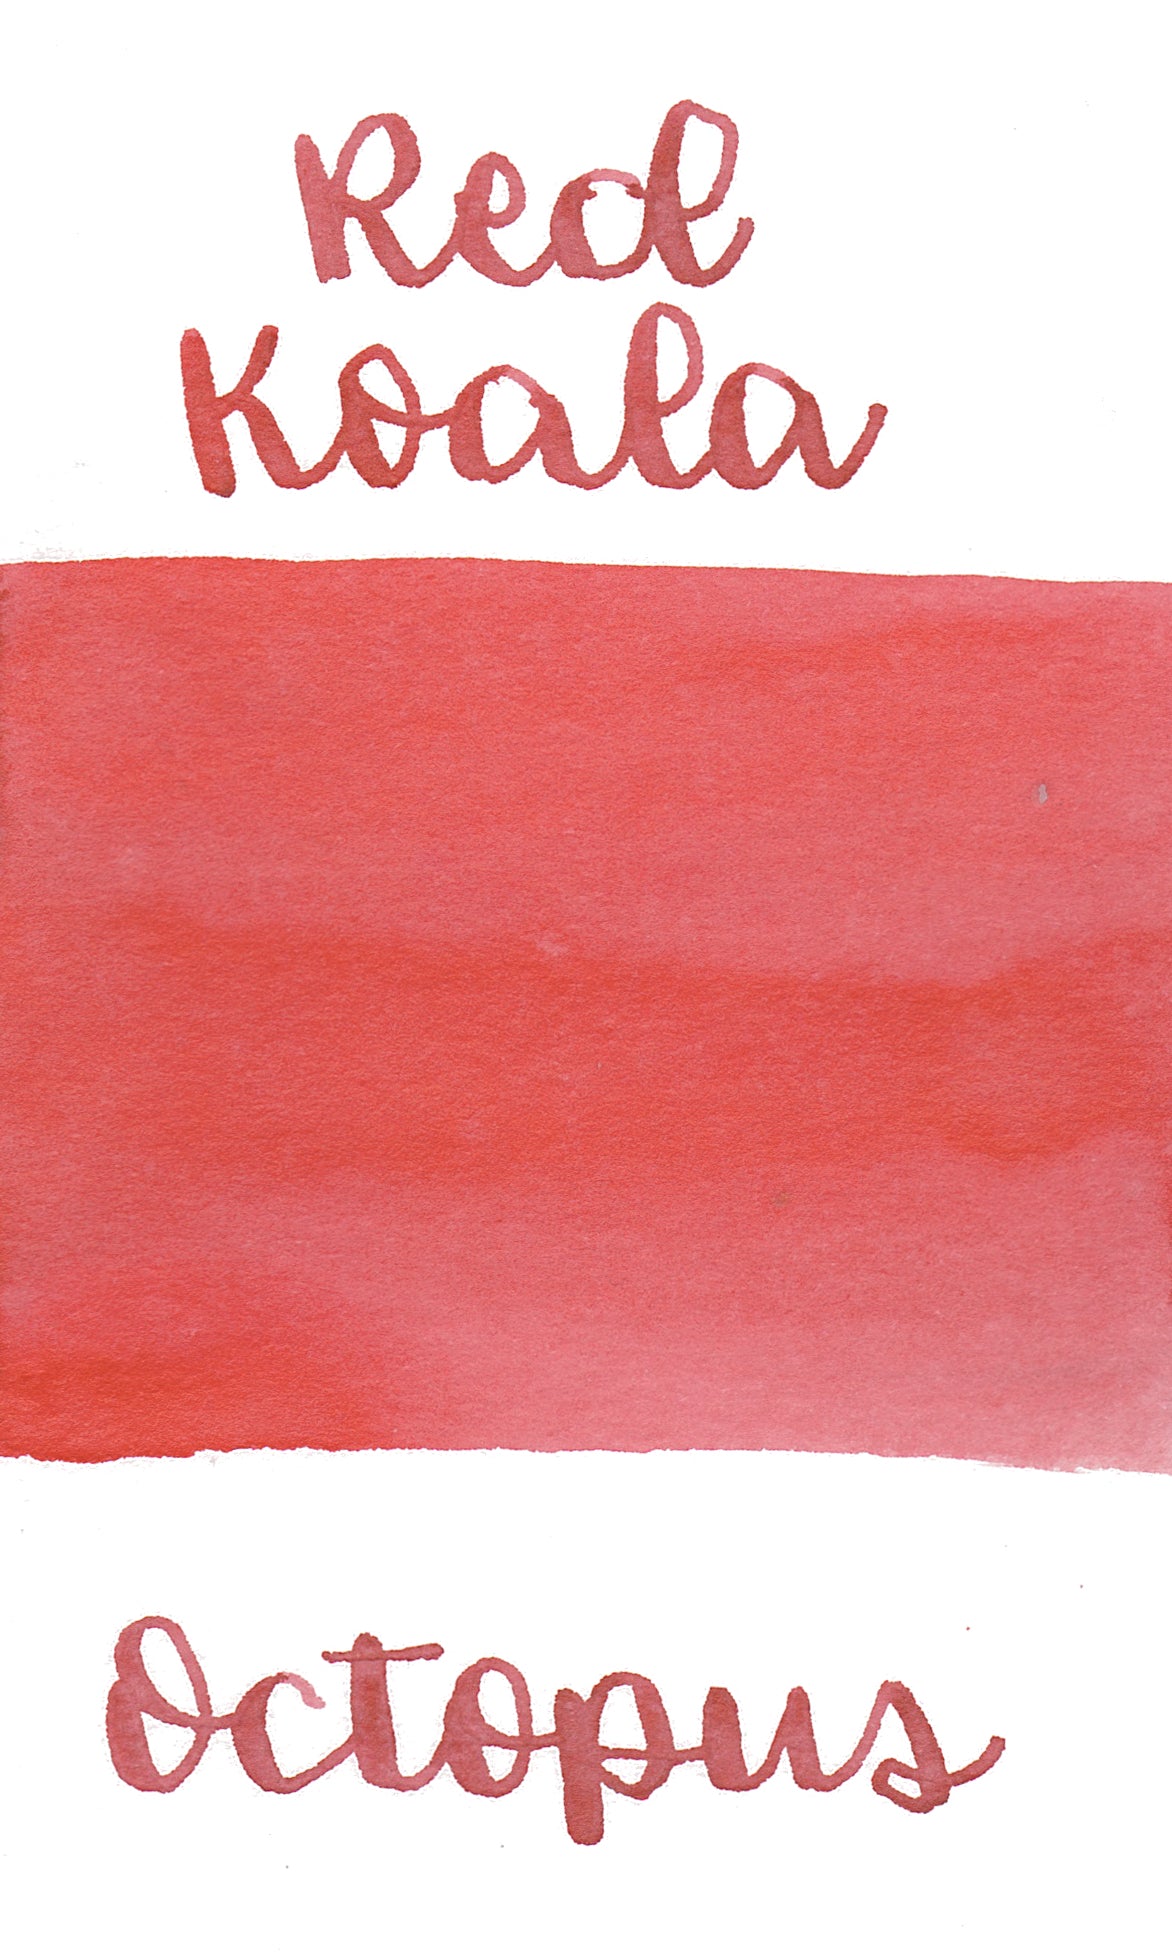 Octopus Write and Draw Ink 388 Red Koala